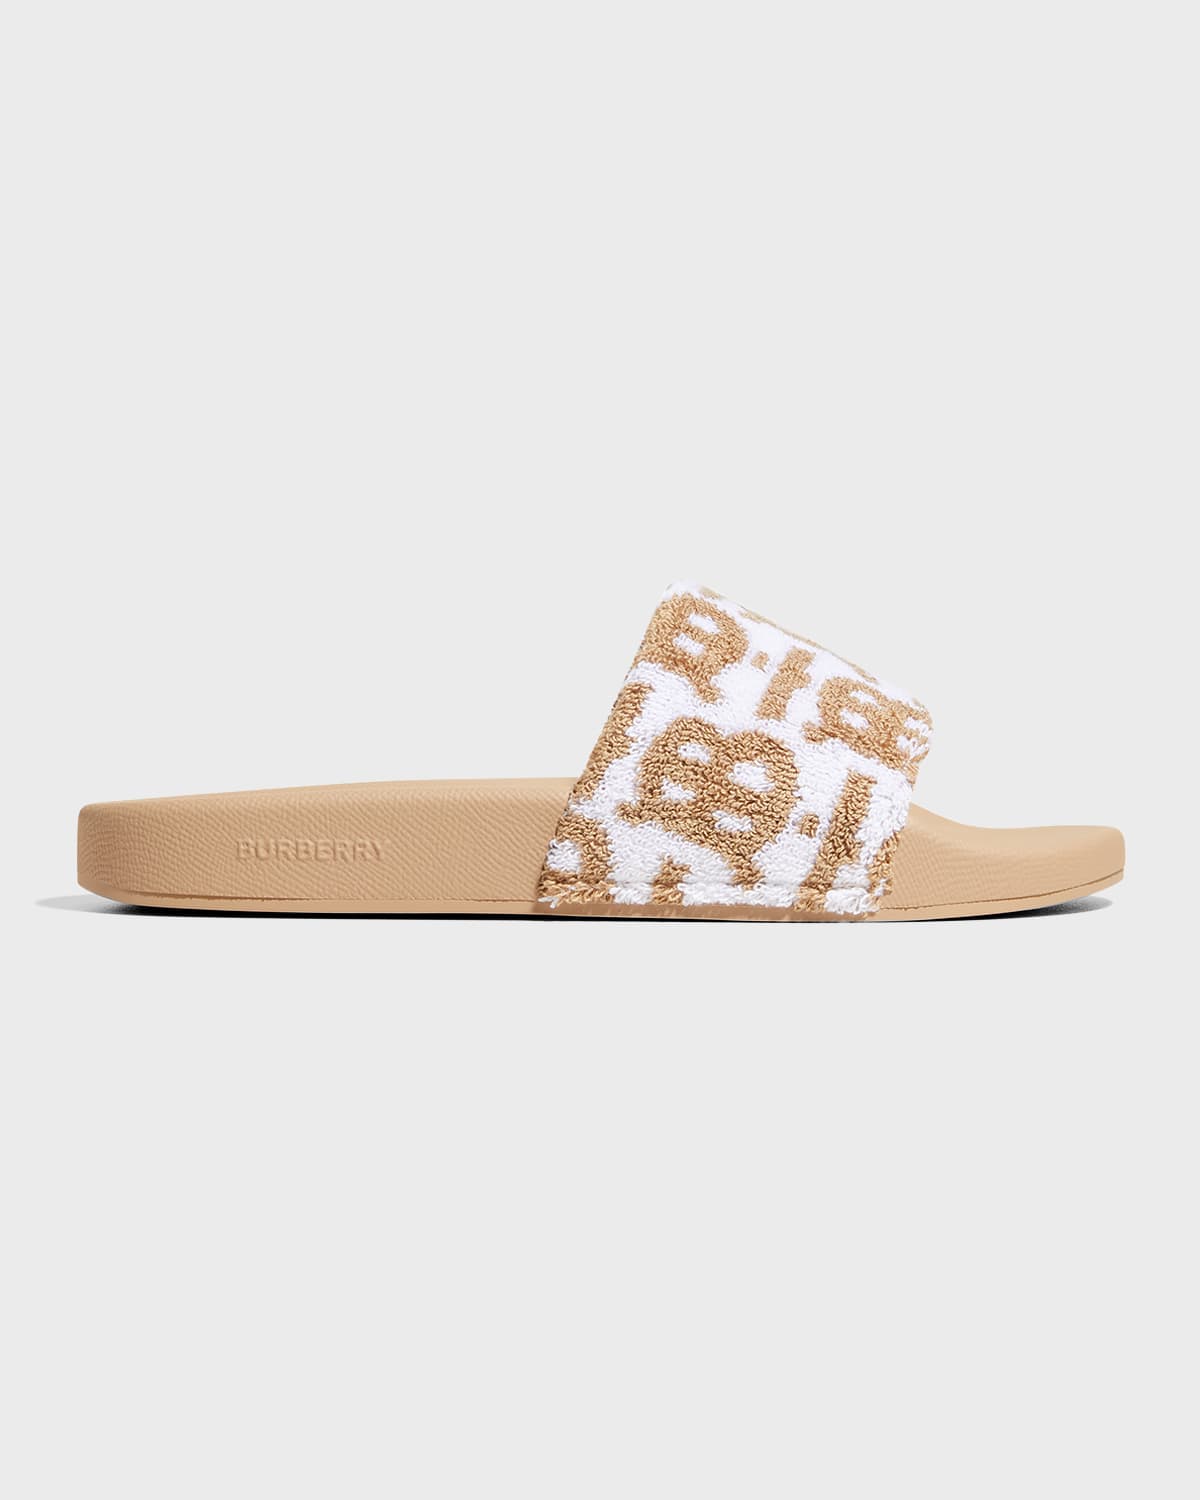 BURBERRY Slides On Sale, Up To 70% Off | ModeSens